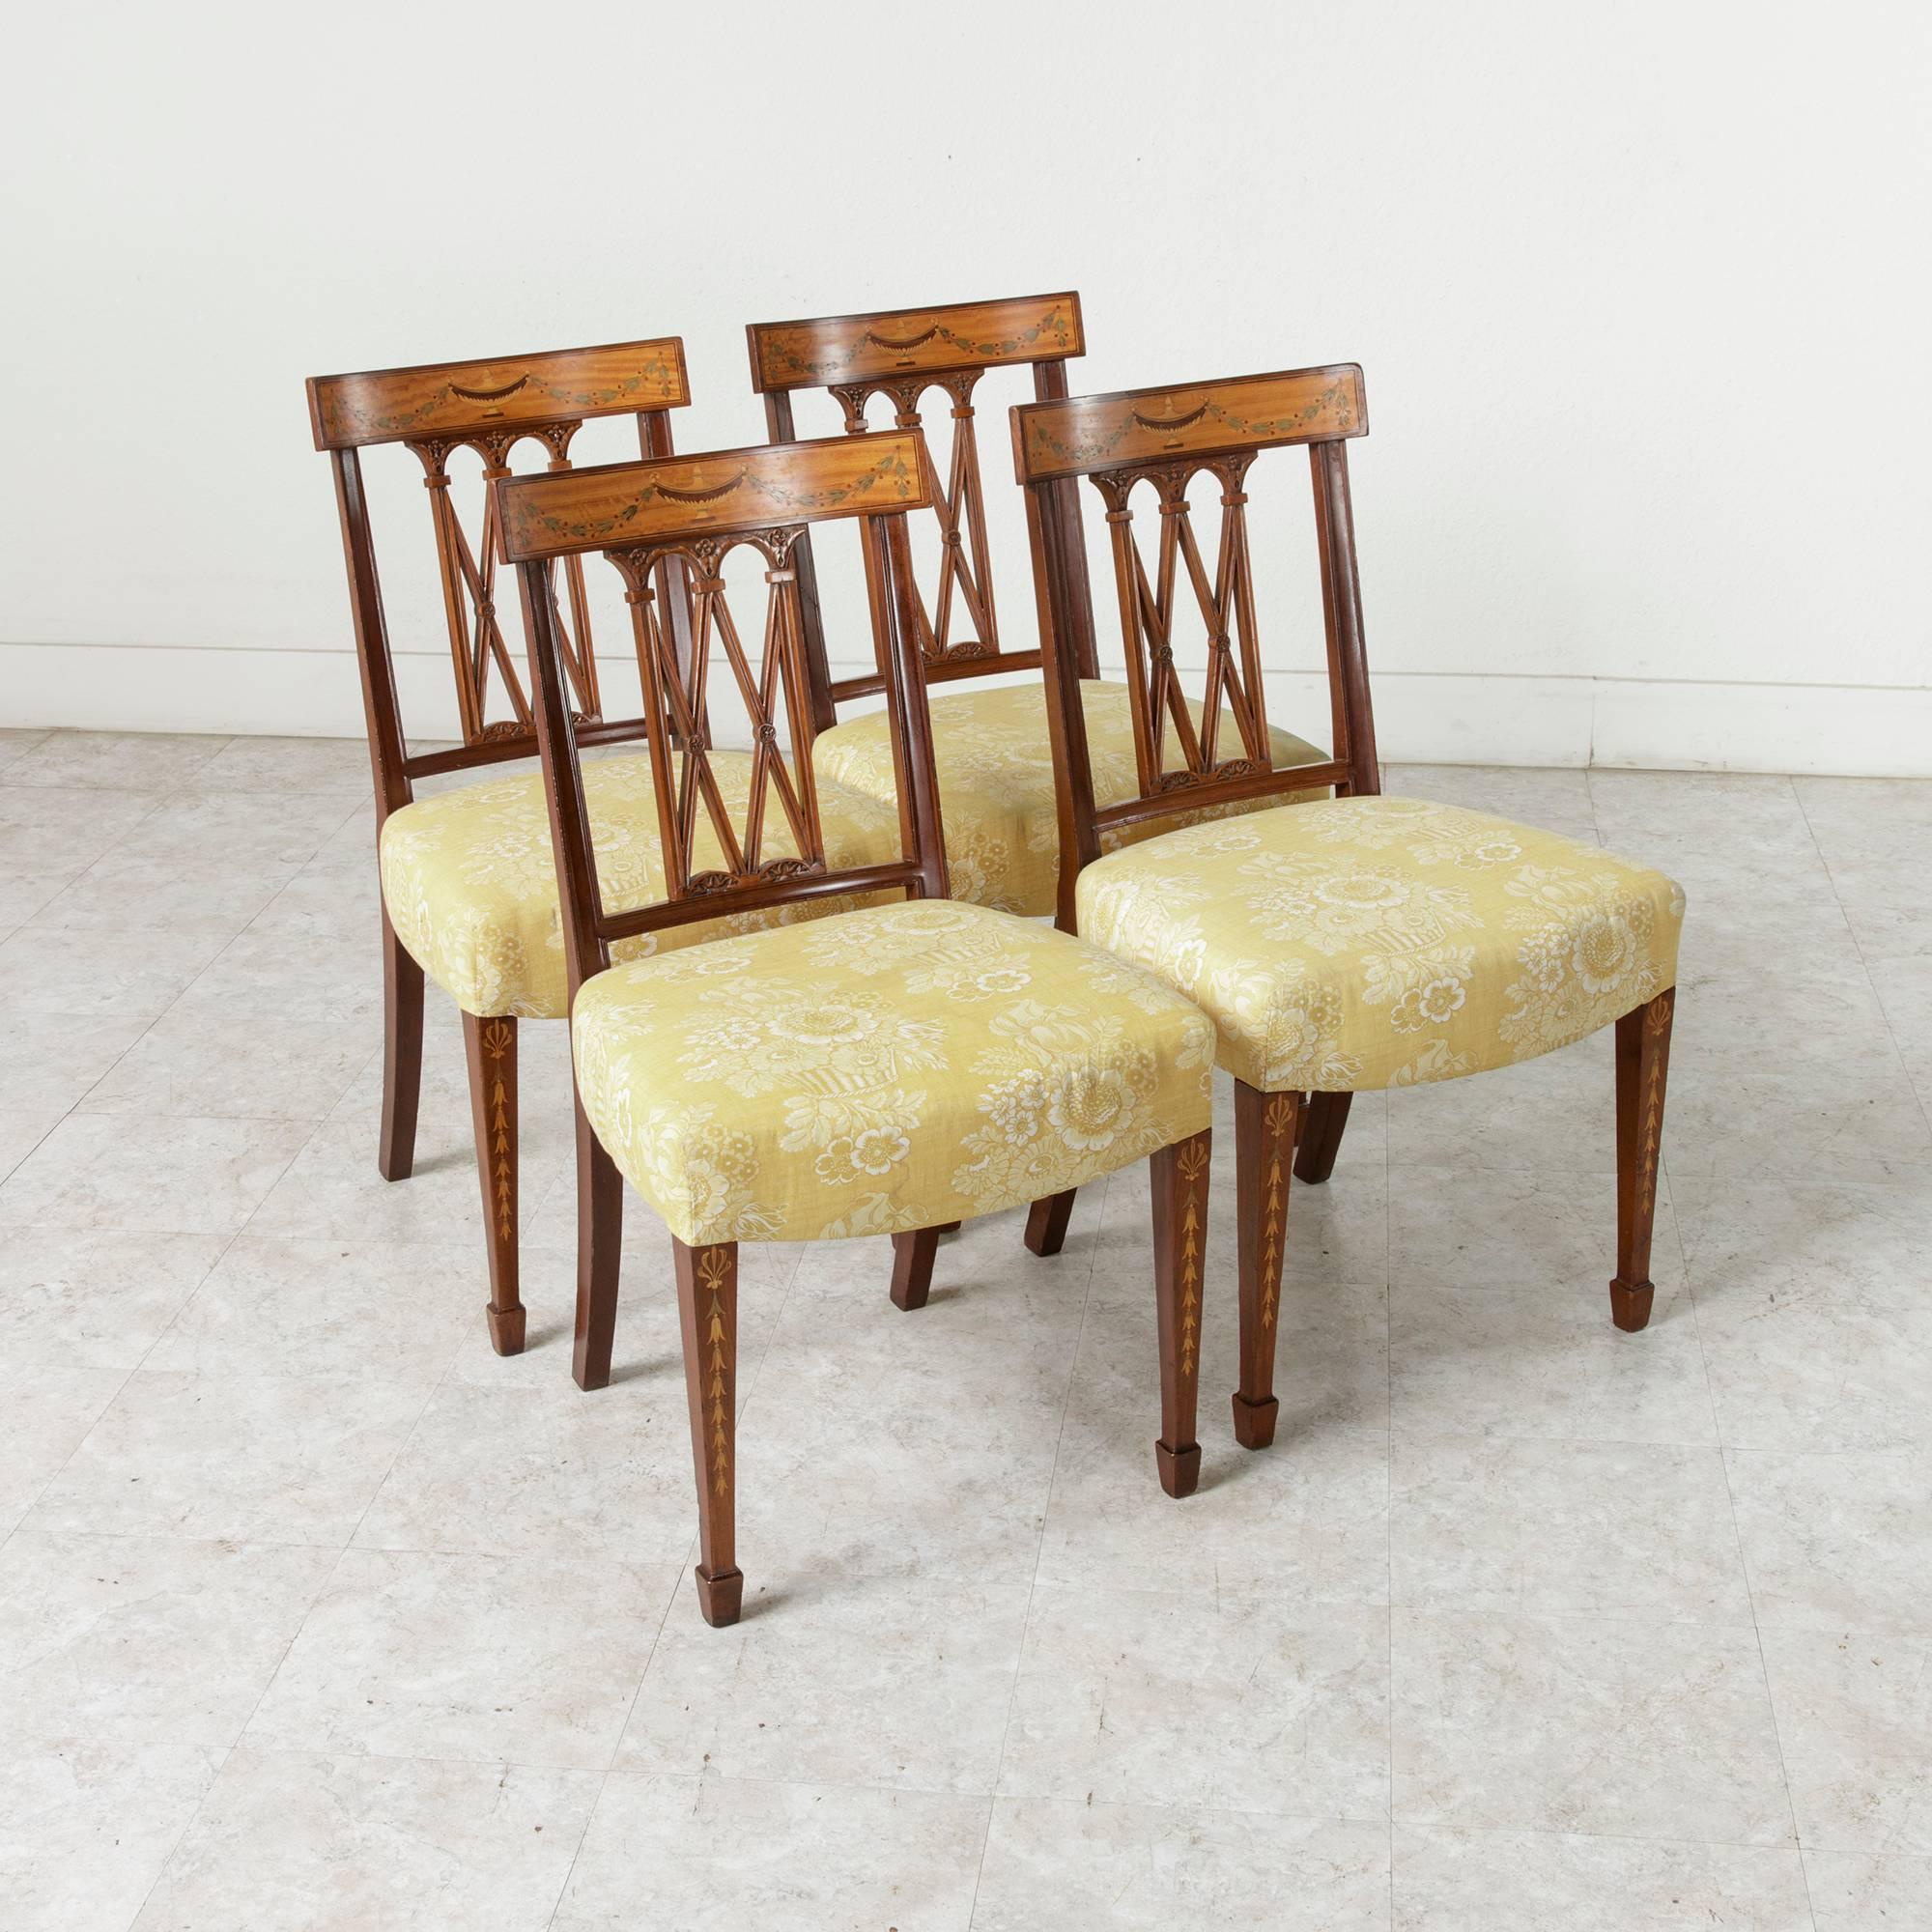 A stunning set of four walnut Italian dining chairs from the 19th century. Intricate inlay of a Classic urn and festooning garland in lemonwood and sycamore grace the curved crown of the hand-carved lattice seatbacks. The marquetry garland motif is